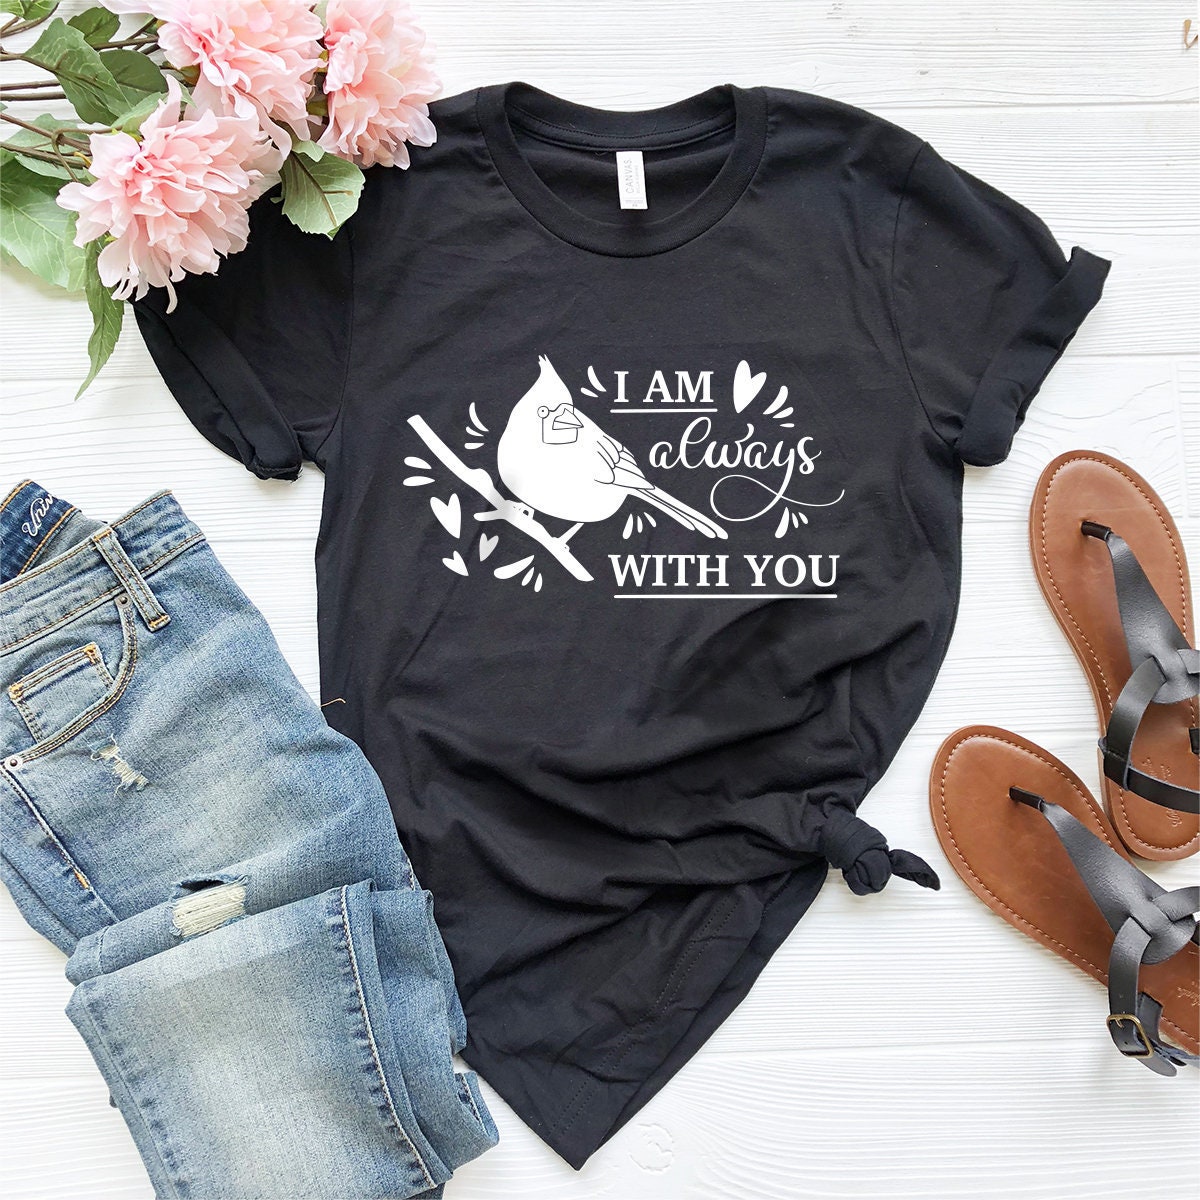 Memorial Shirt, I Am Always With You Shirt, Remembrance Shirt, Rest In Peace Tee, Loss Of Love One Shirt, Bereavement Tee, In Memory Of Tee - Fastdeliverytees.com